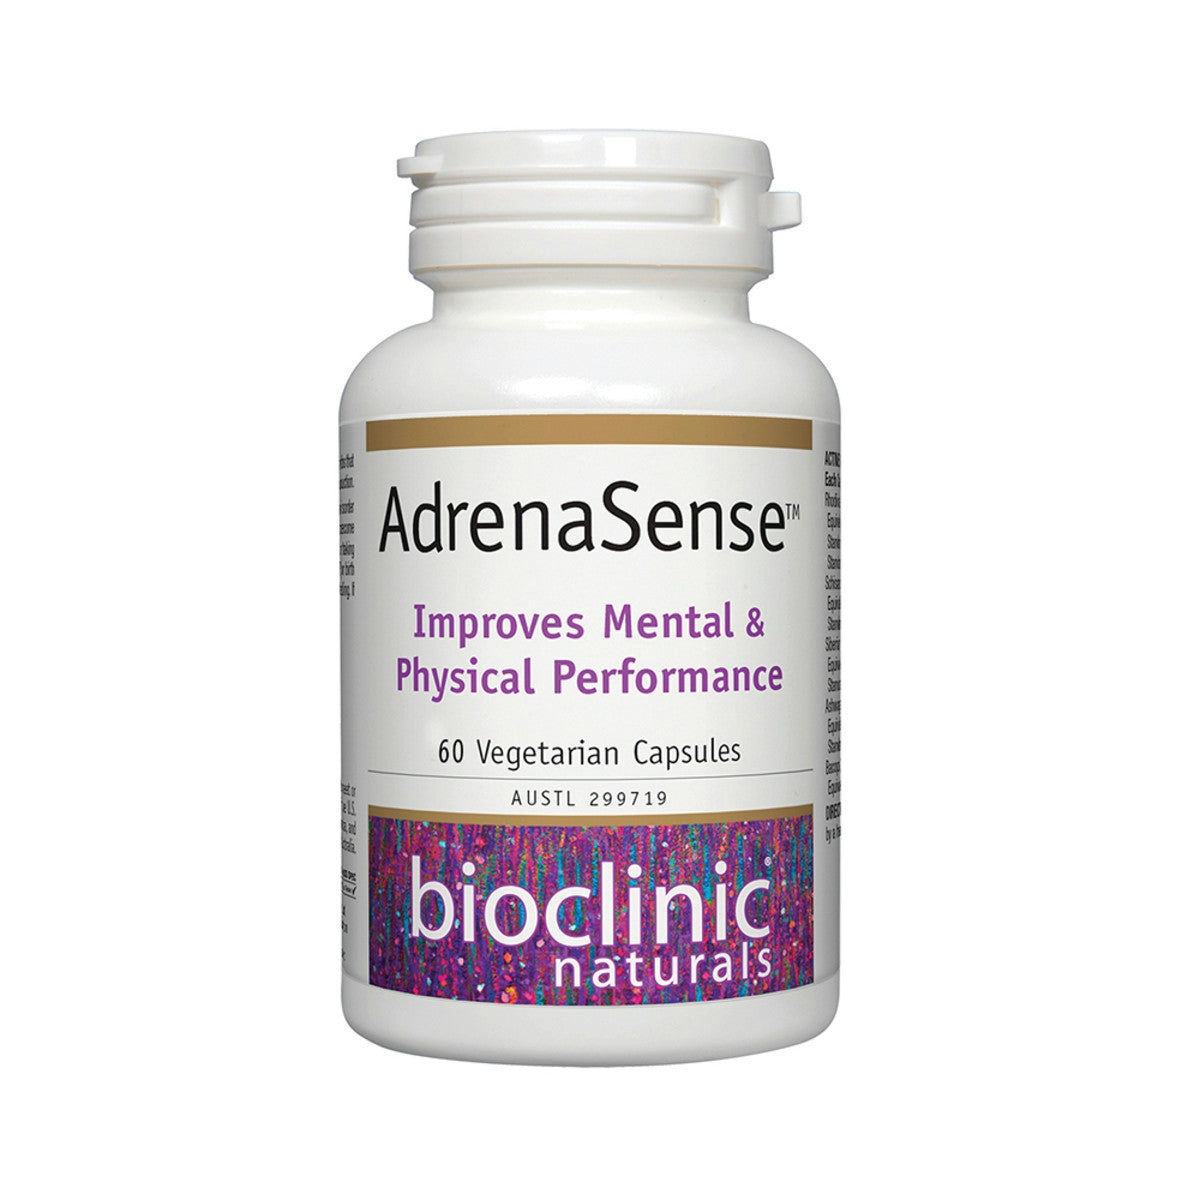 Image of Bioclinic Naturals AdrenaSense 60vc with a white background